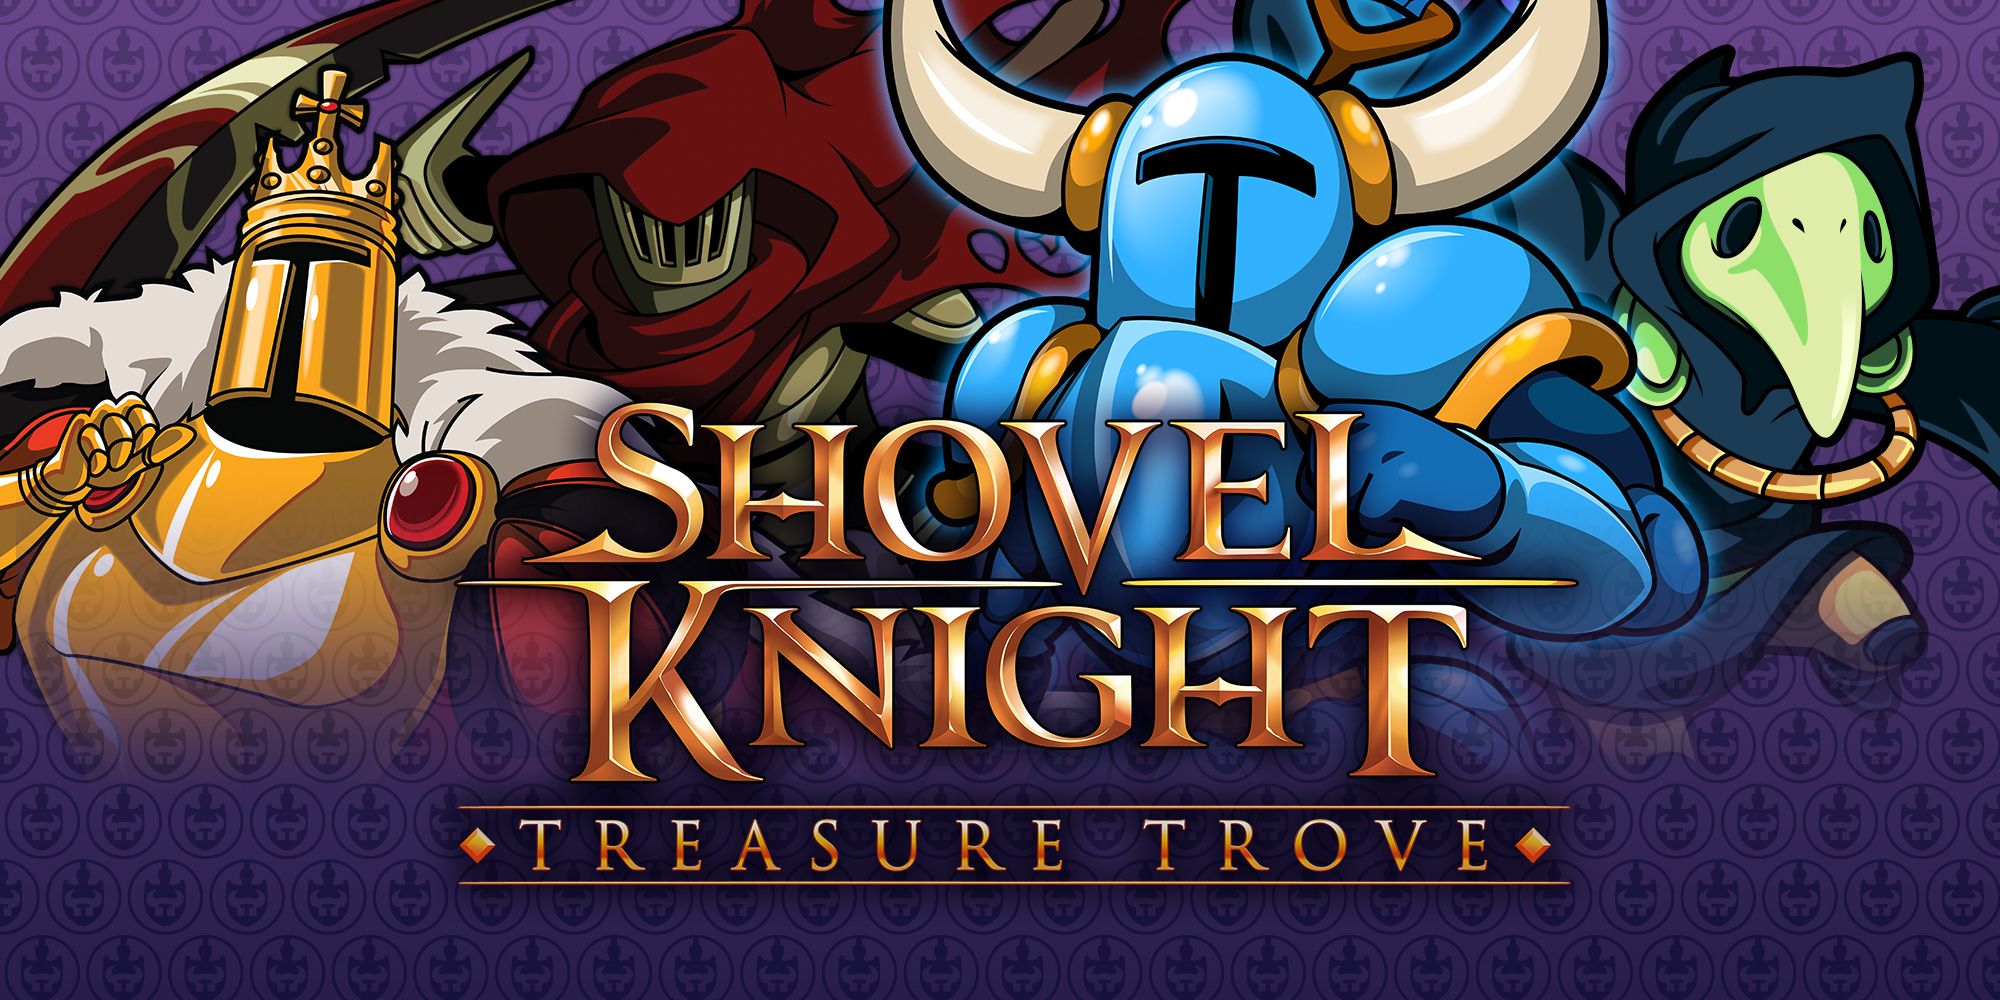 Shovel Knight Treasure Trove Art With All The Game's Player Characters